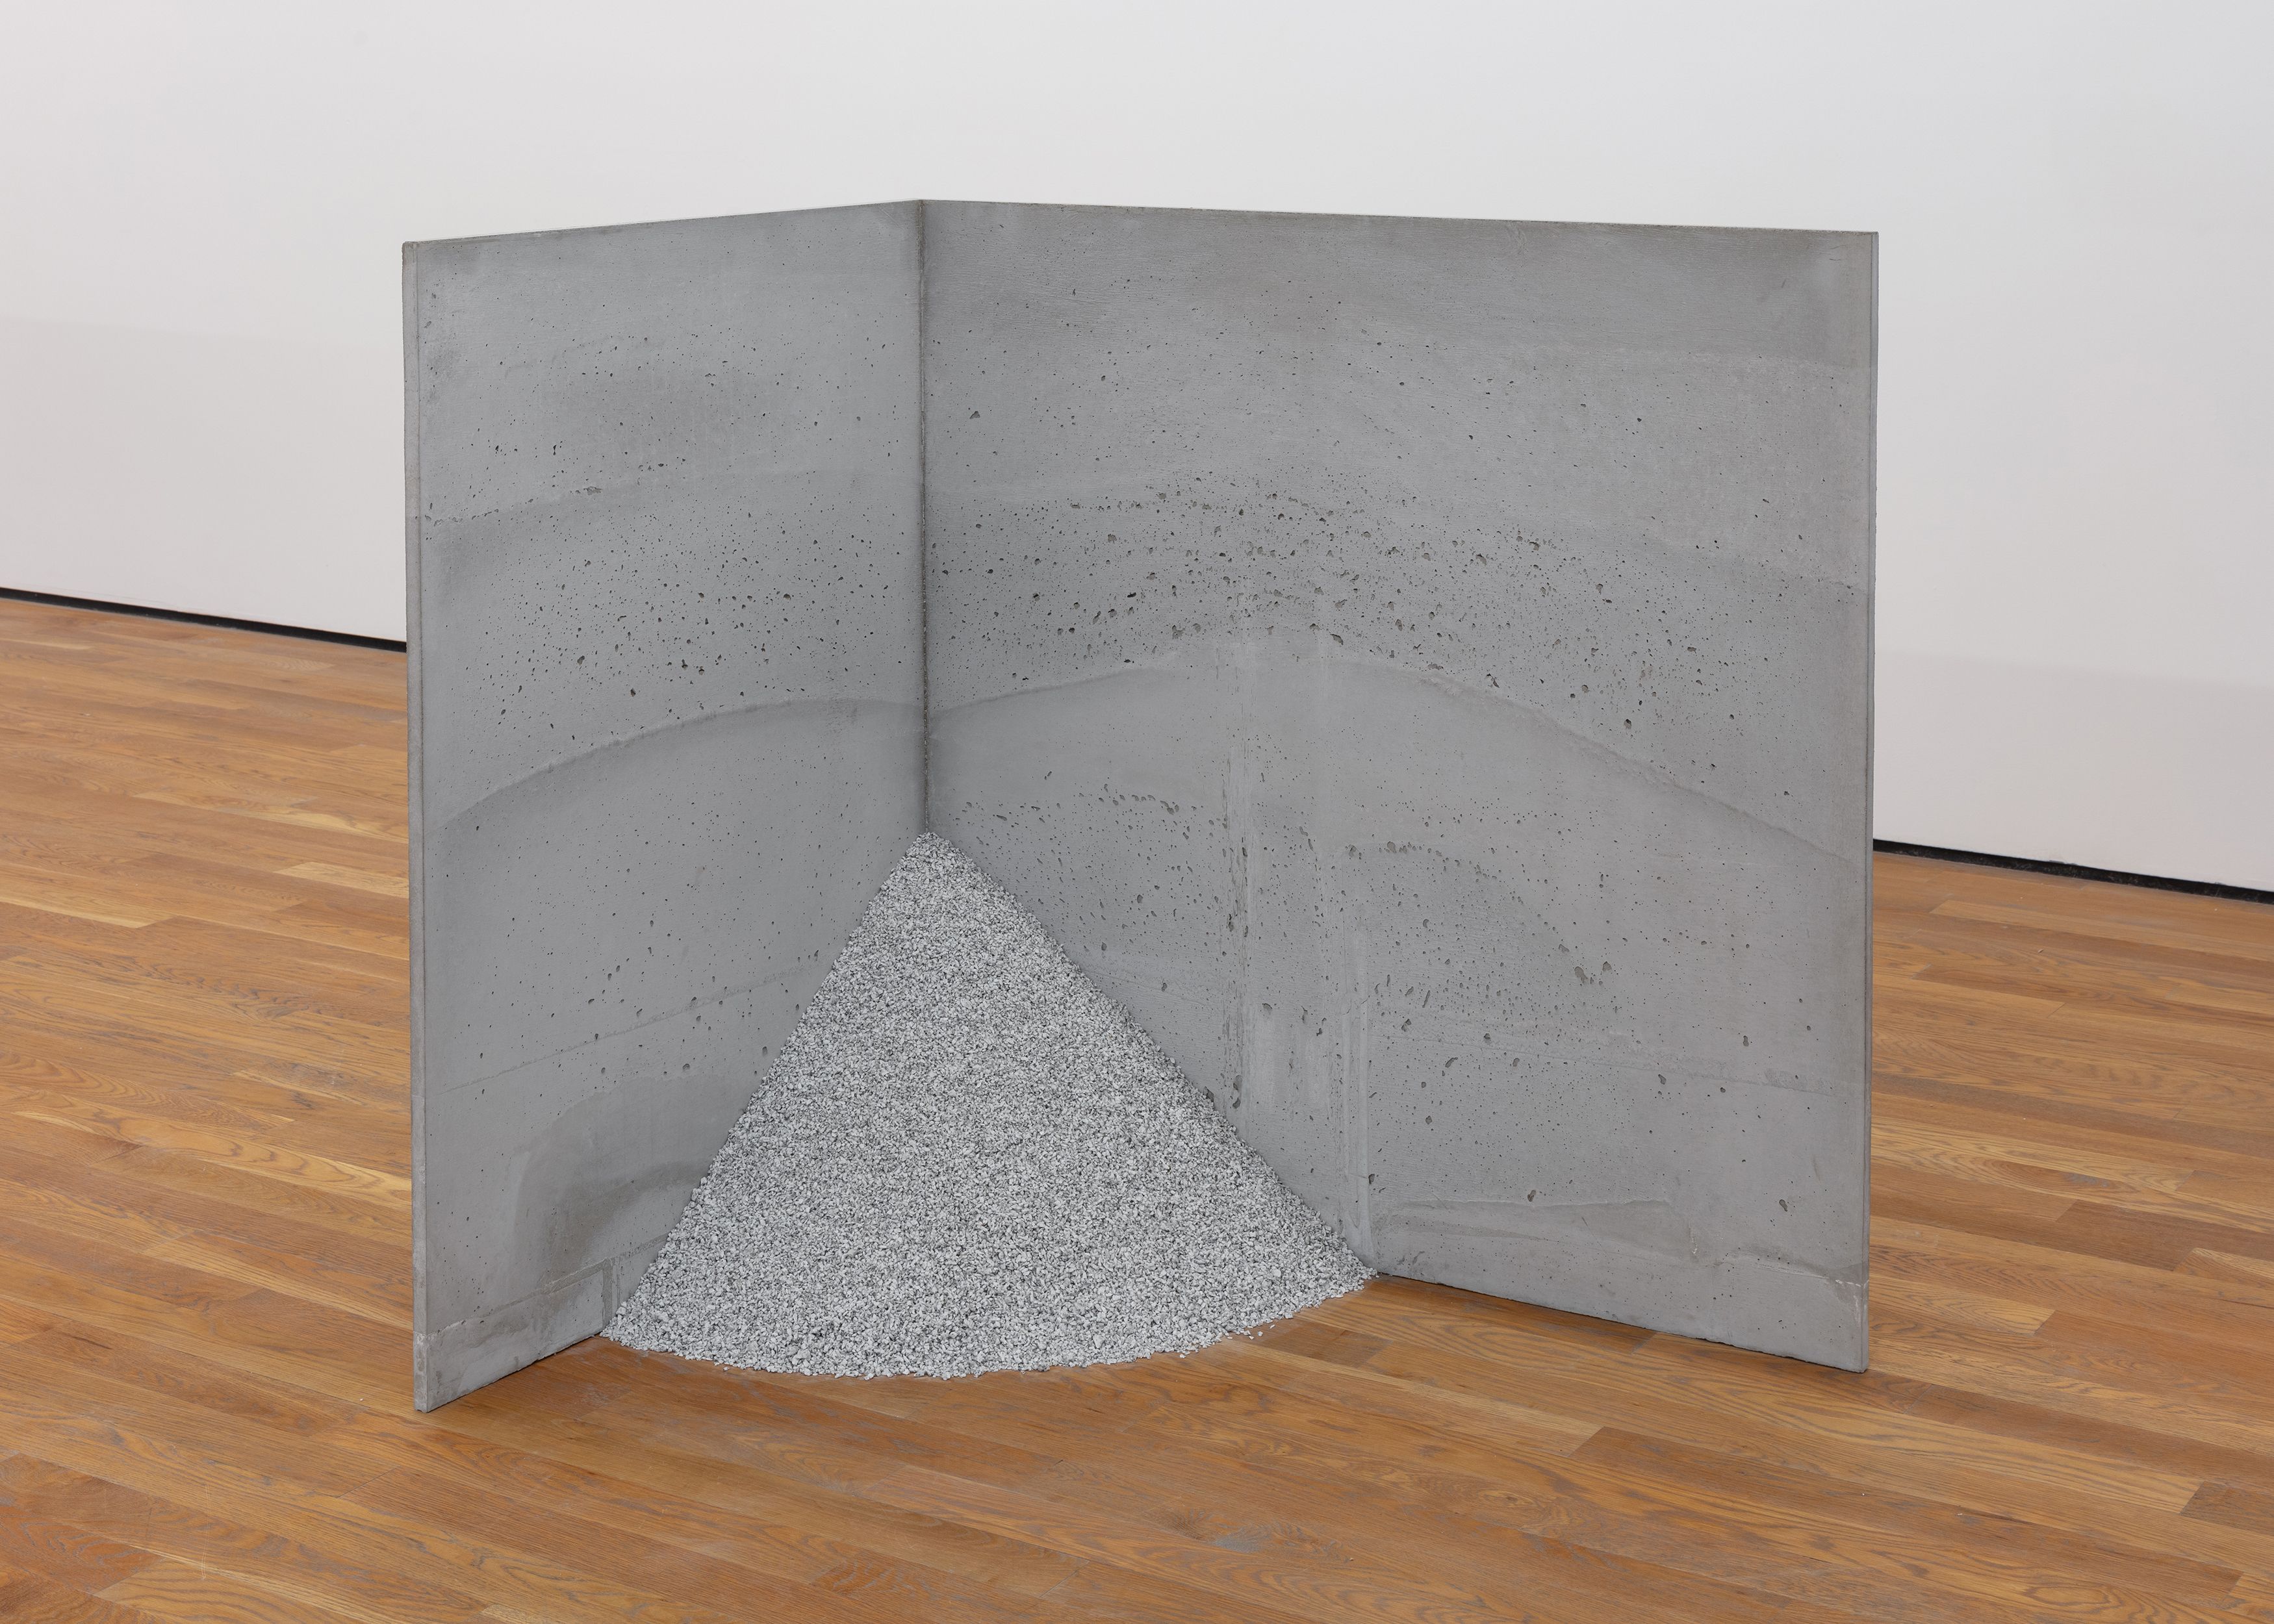 Stephen Lichty, Repose 6, 2021, concrete and crushed granite, 44 x 44 x 32 in. (111.76 x 111.76 x 81.23 cm)